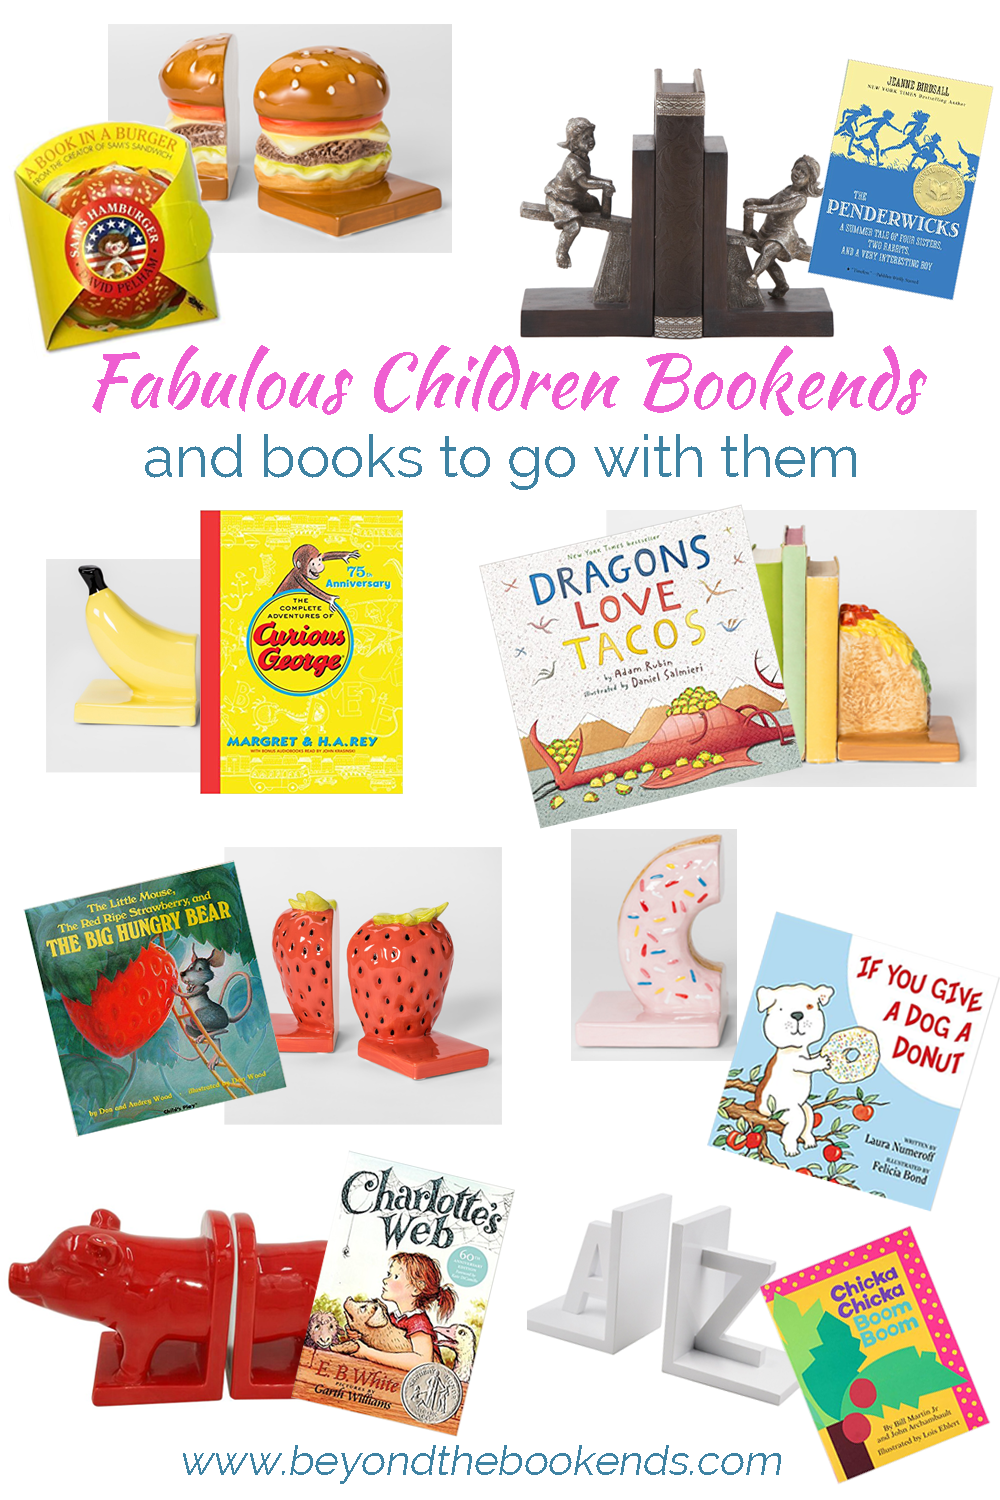 Looking for a perfect birthday gift? Why not give an adorable book and bookends to match? We've rounded up 16 fabulous pairs that are affordable too.